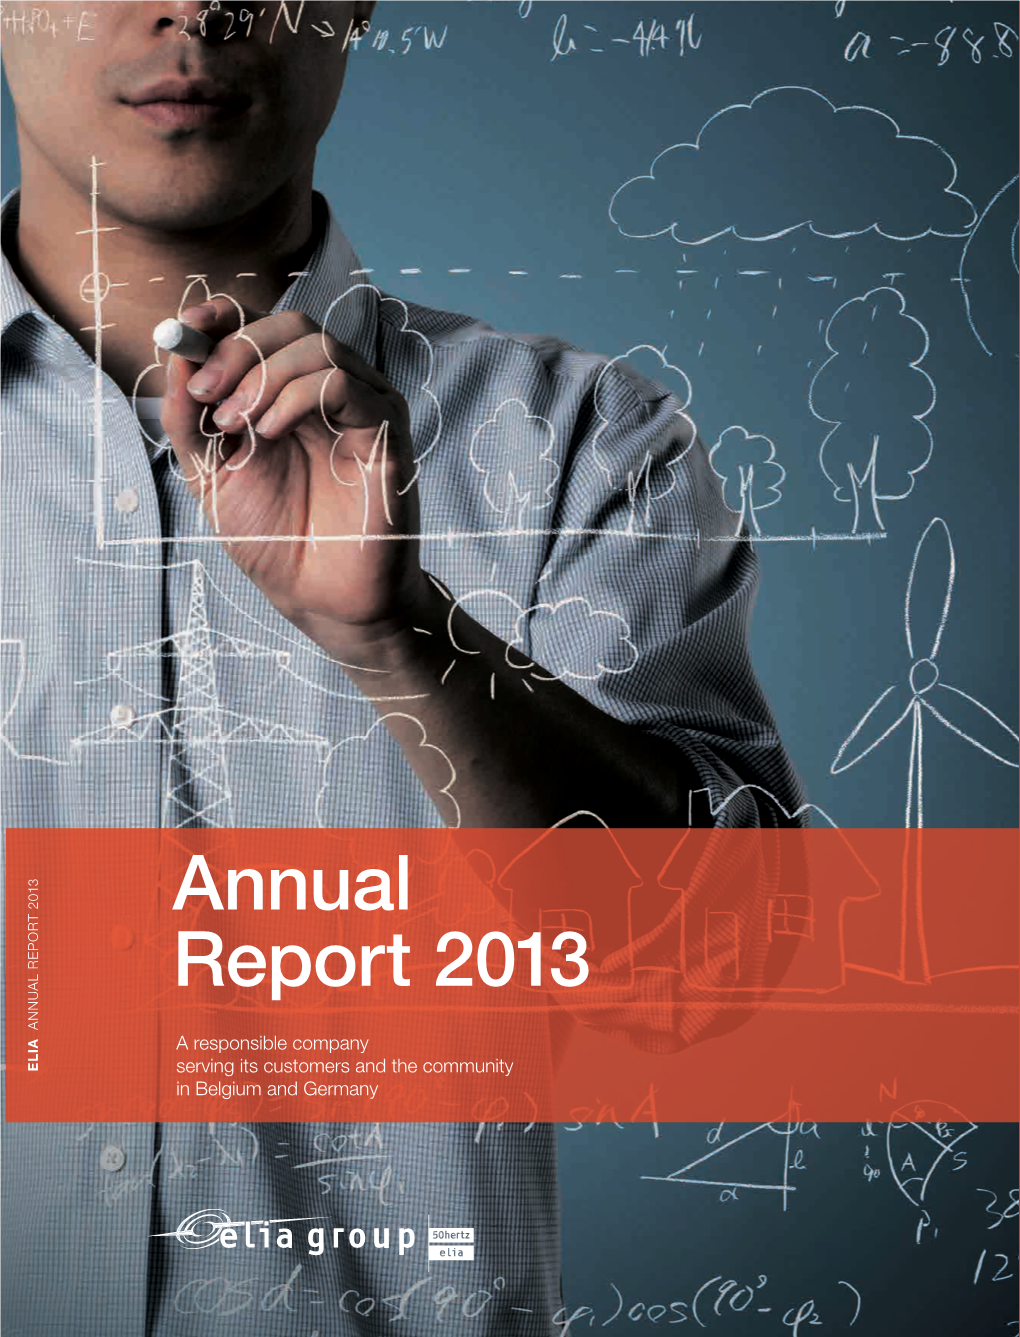 ANNUAL REPORT 2013 a Responsible Company